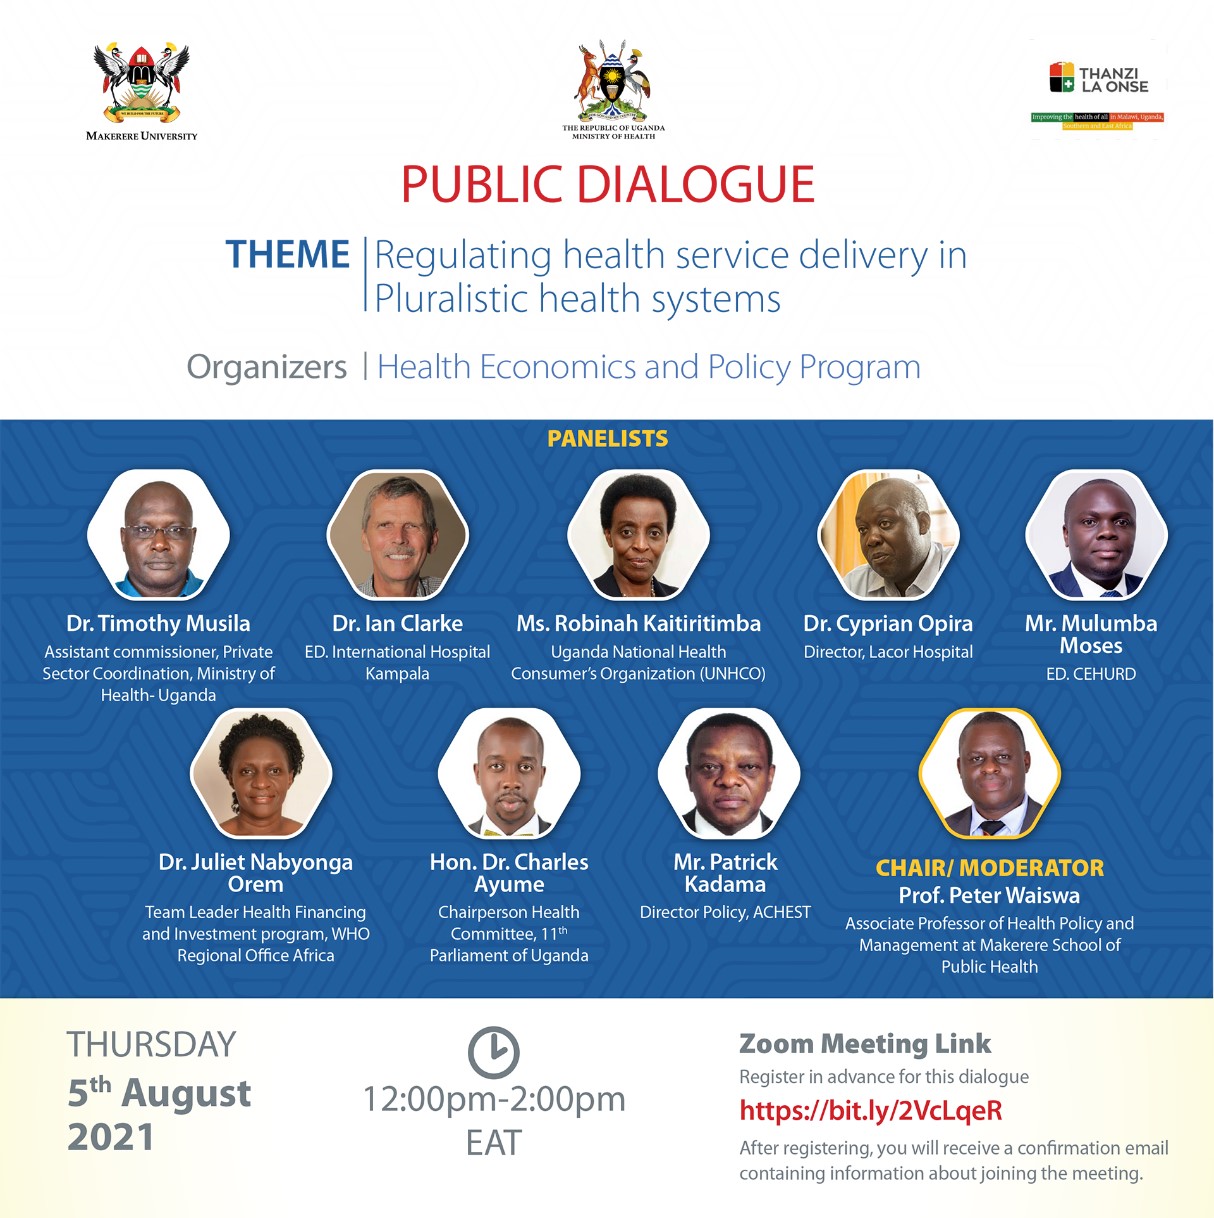 Poster, showing panellists who presented at the dialogue